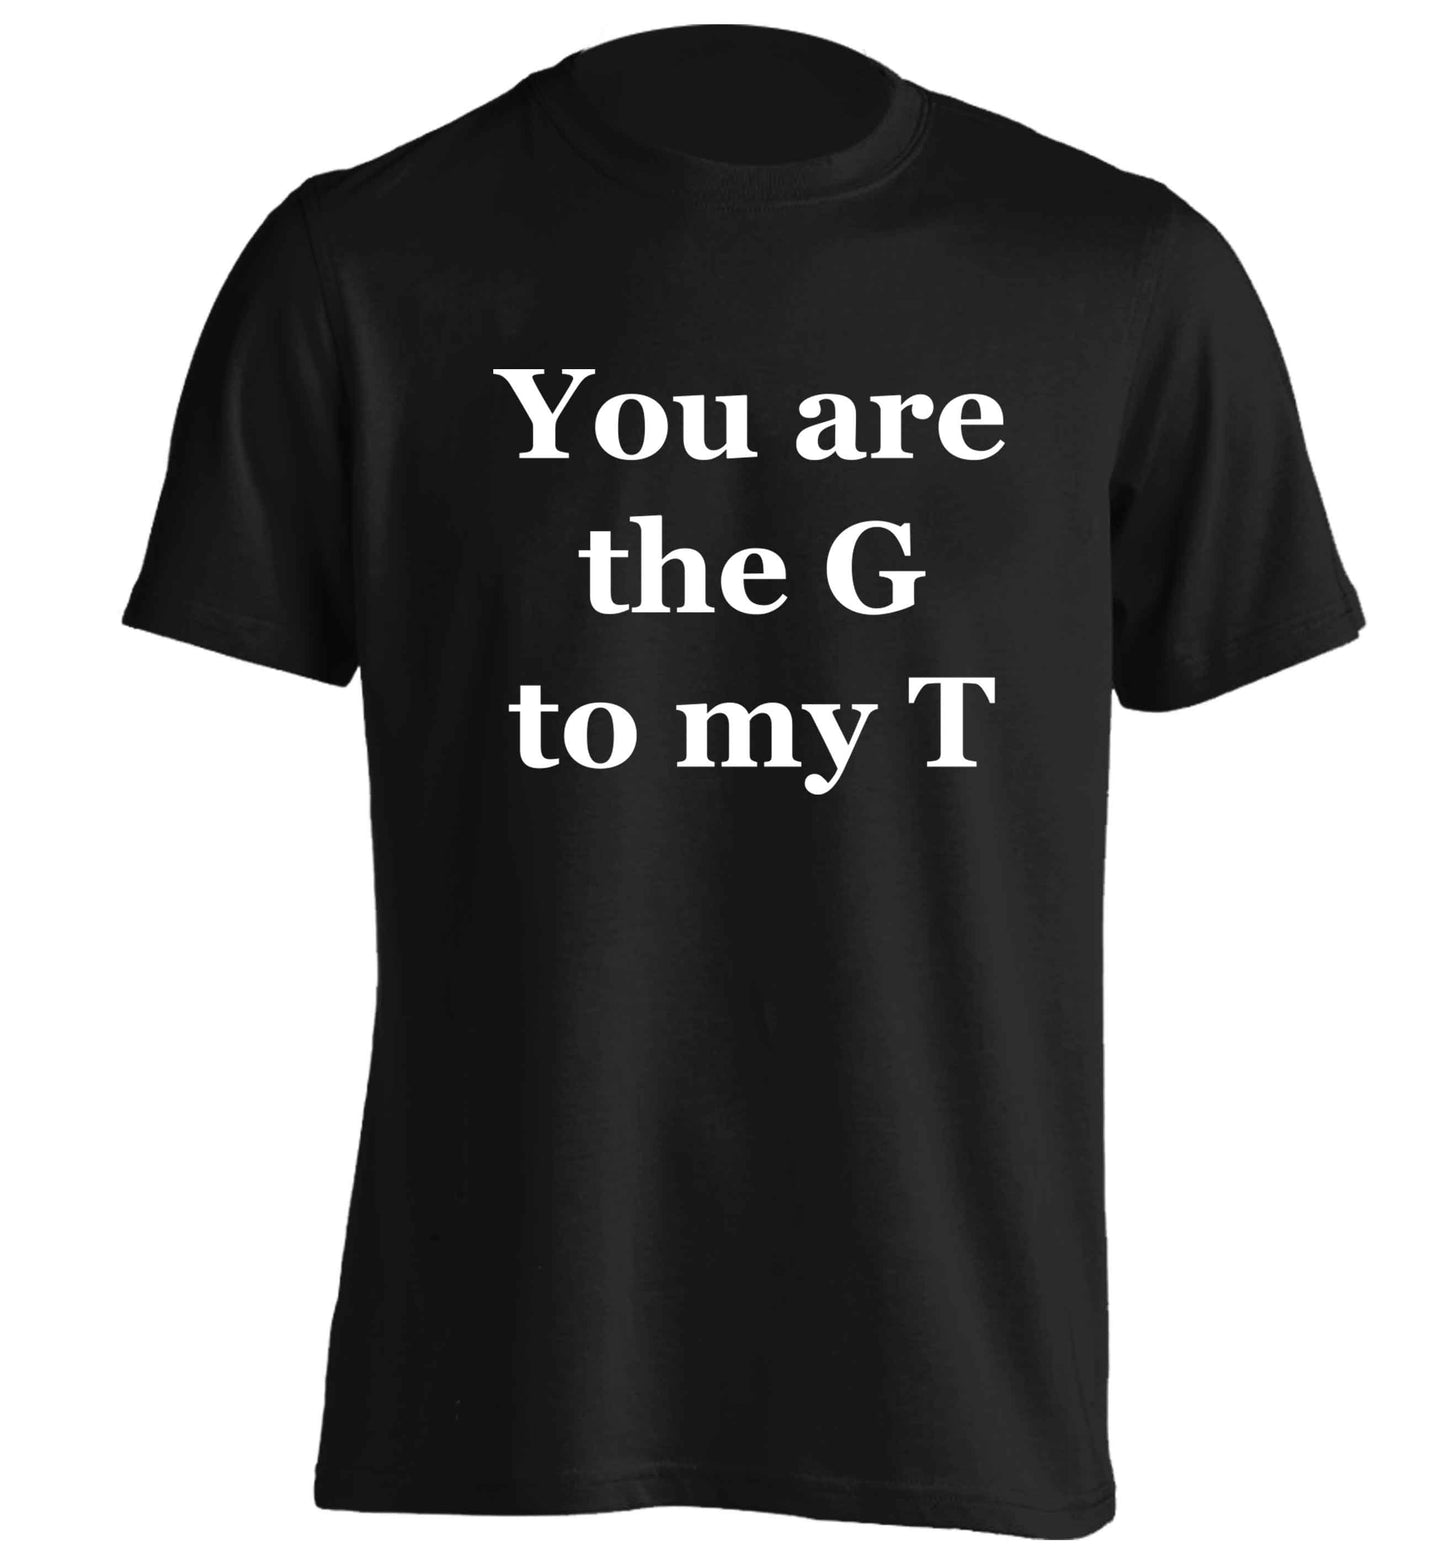 You are the G to my T adults unisex black Tshirt 2XL